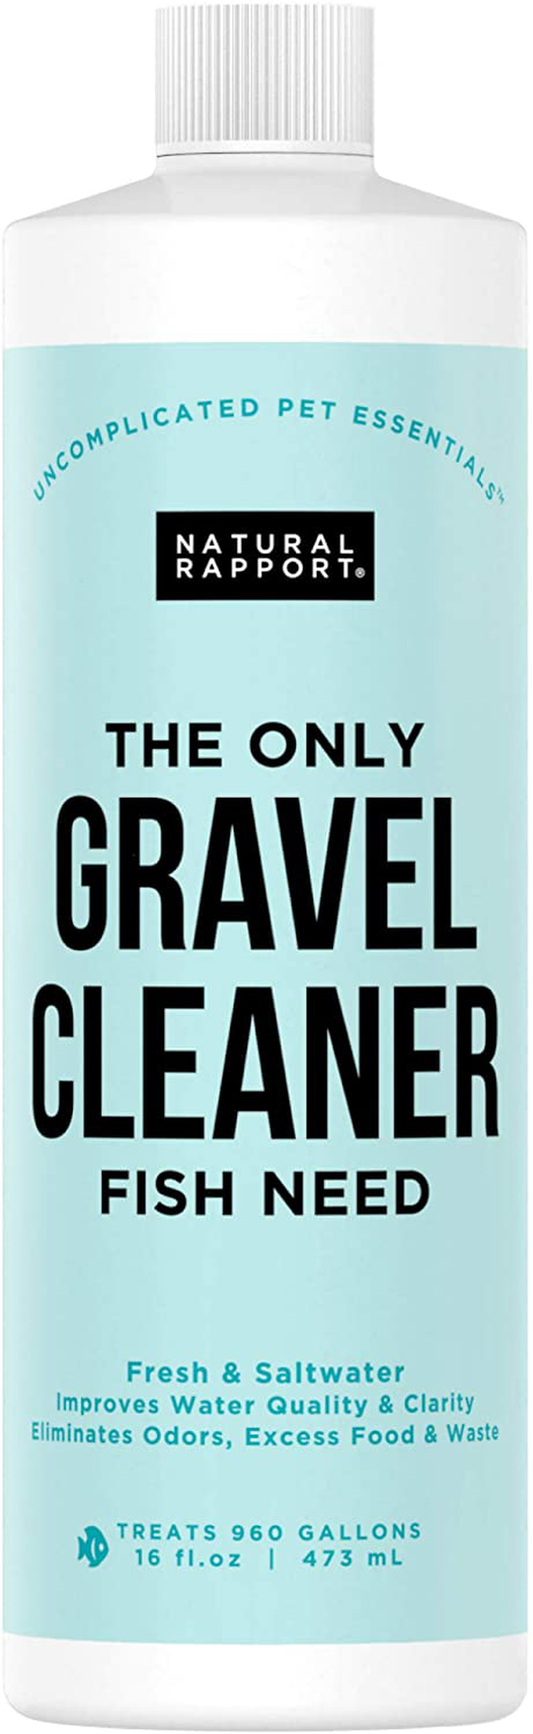 Natural Rapport Aquarium Gravel Cleaner - the Only Gravel Cleaner Fish Need - Professional Aquarium Gravel Cleaner to Naturally Maintain a Healthier Tank, Reducing Fish Waste and Toxins (16 Fl Oz) Animals & Pet Supplies > Pet Supplies > Fish Supplies > Aquarium Gravel & Substrates Natural Rapport   